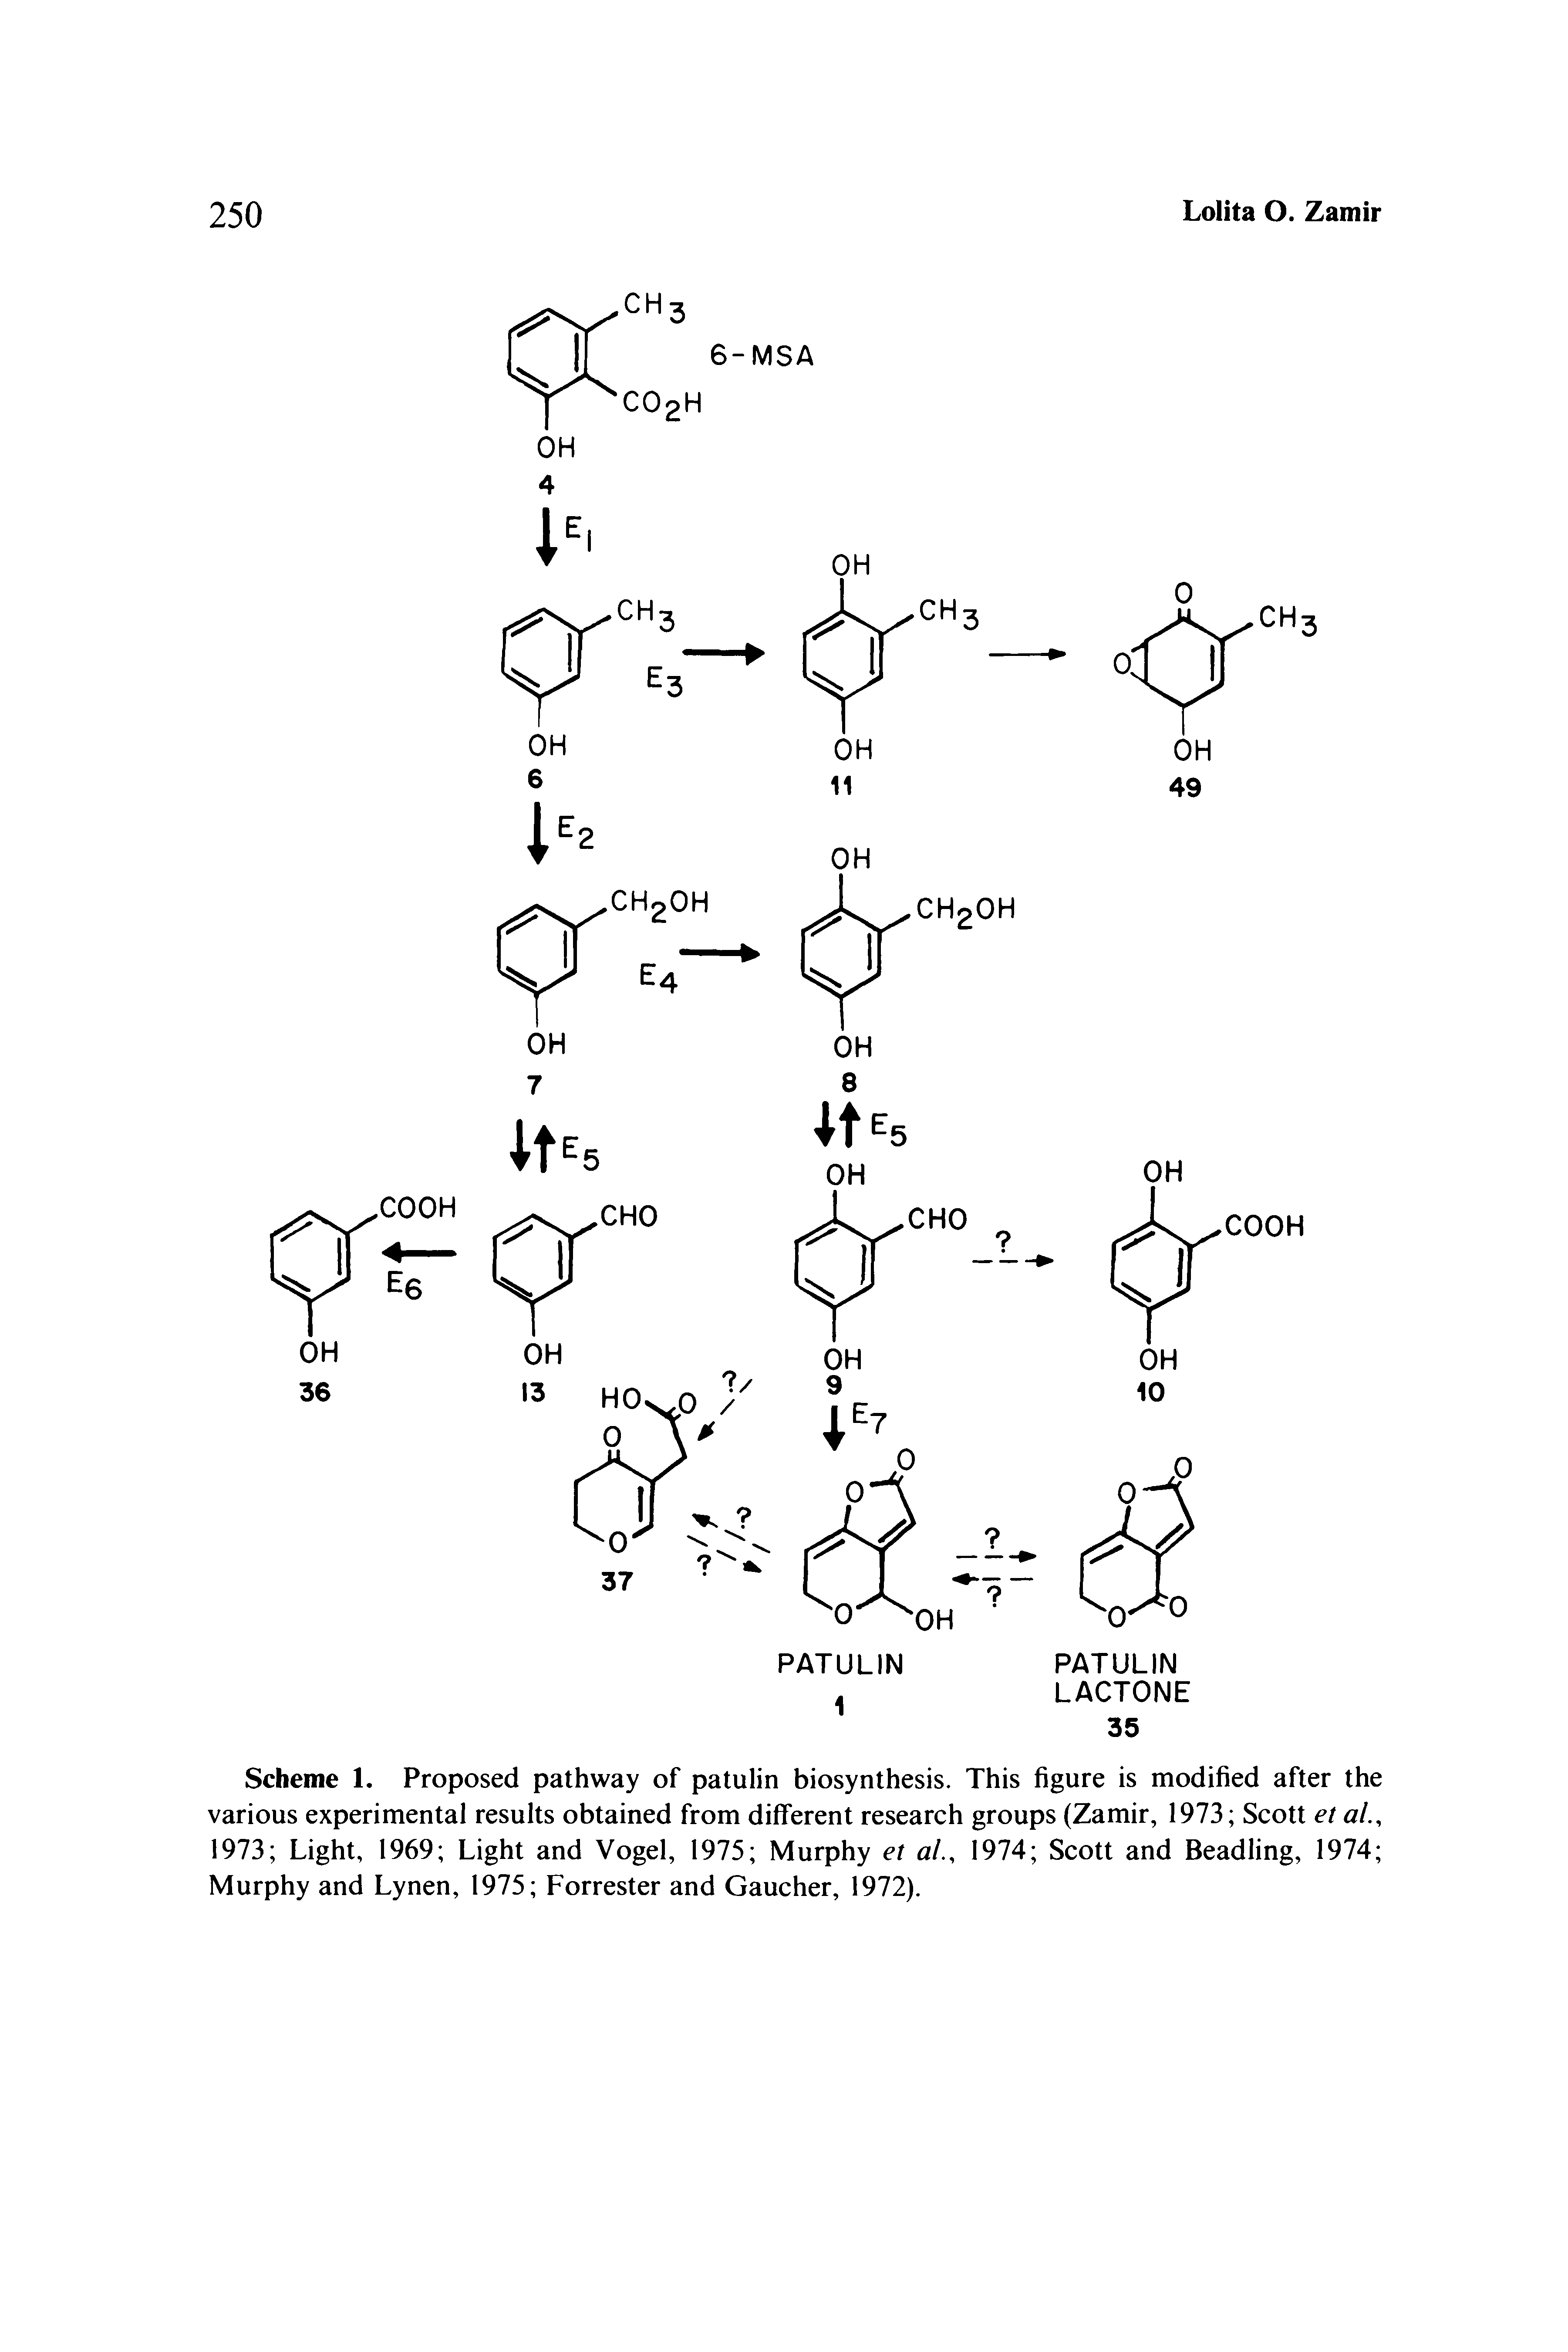 Scheme 1. Proposed pathway of patulin biosynthesis. This figure is modified after the various experimental results obtained from different research groups (Zamir, 1973 Scott et ai, 1973 Light, 1969 Light and Vogel, 1975 Murphy et al., 1974 Scott and Beadling, 1974 Murphy and Lynen, 1975 Forrester and Gaucher, 1972).